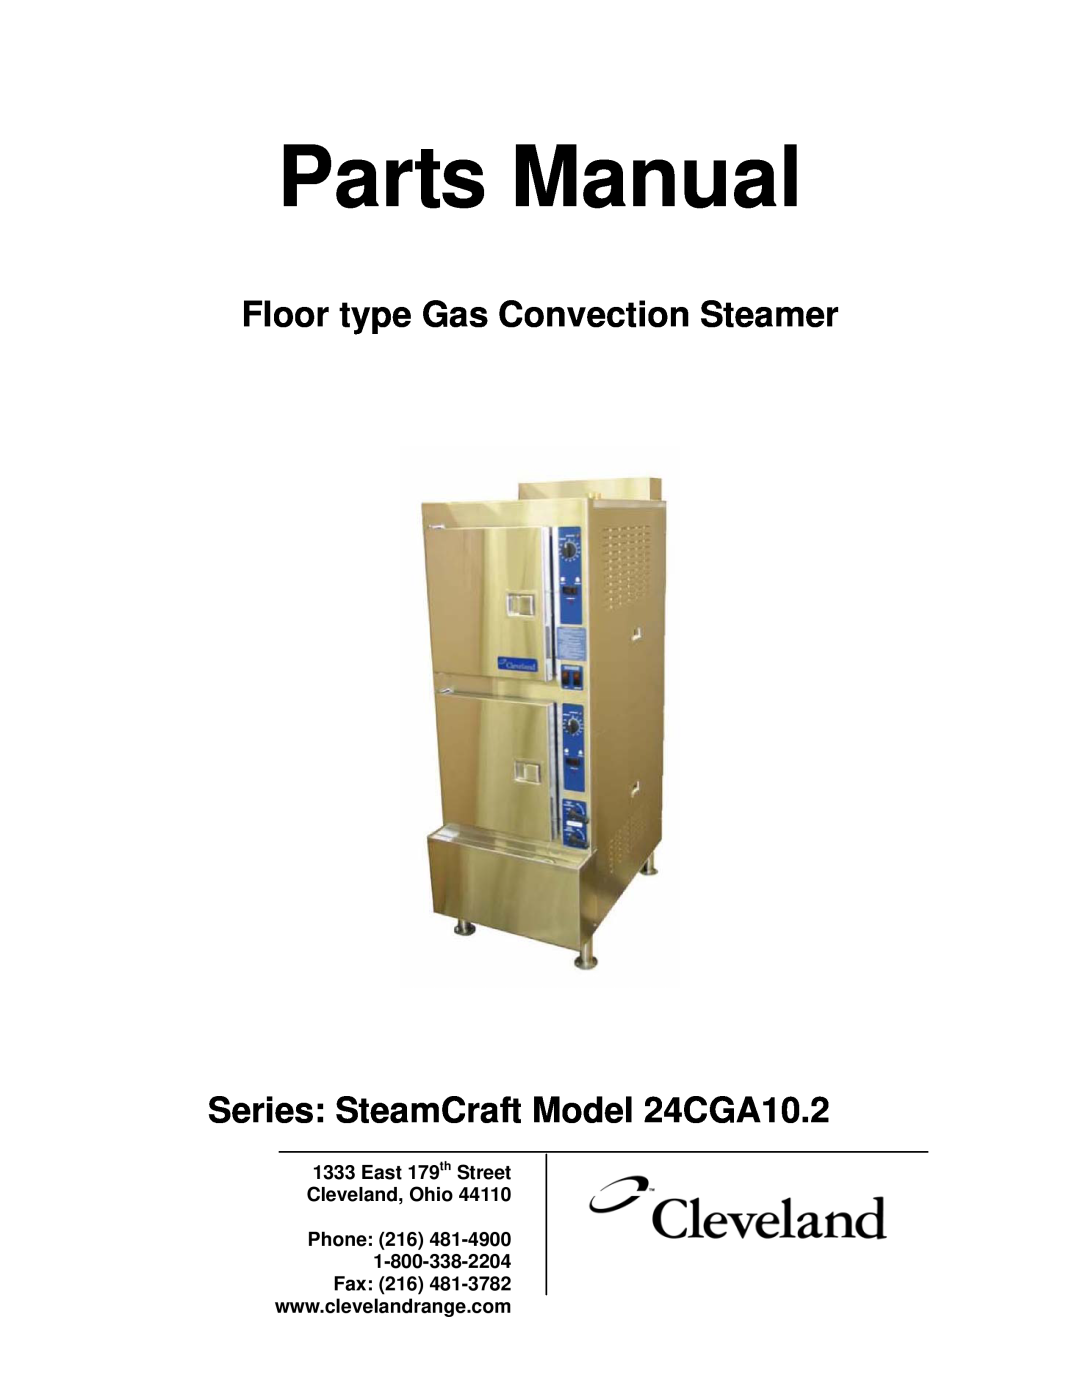 Cleveland Range manual Parts Manual, Floor type Gas Convection Steamer Series SteamCraft Model 24CGA10.2 